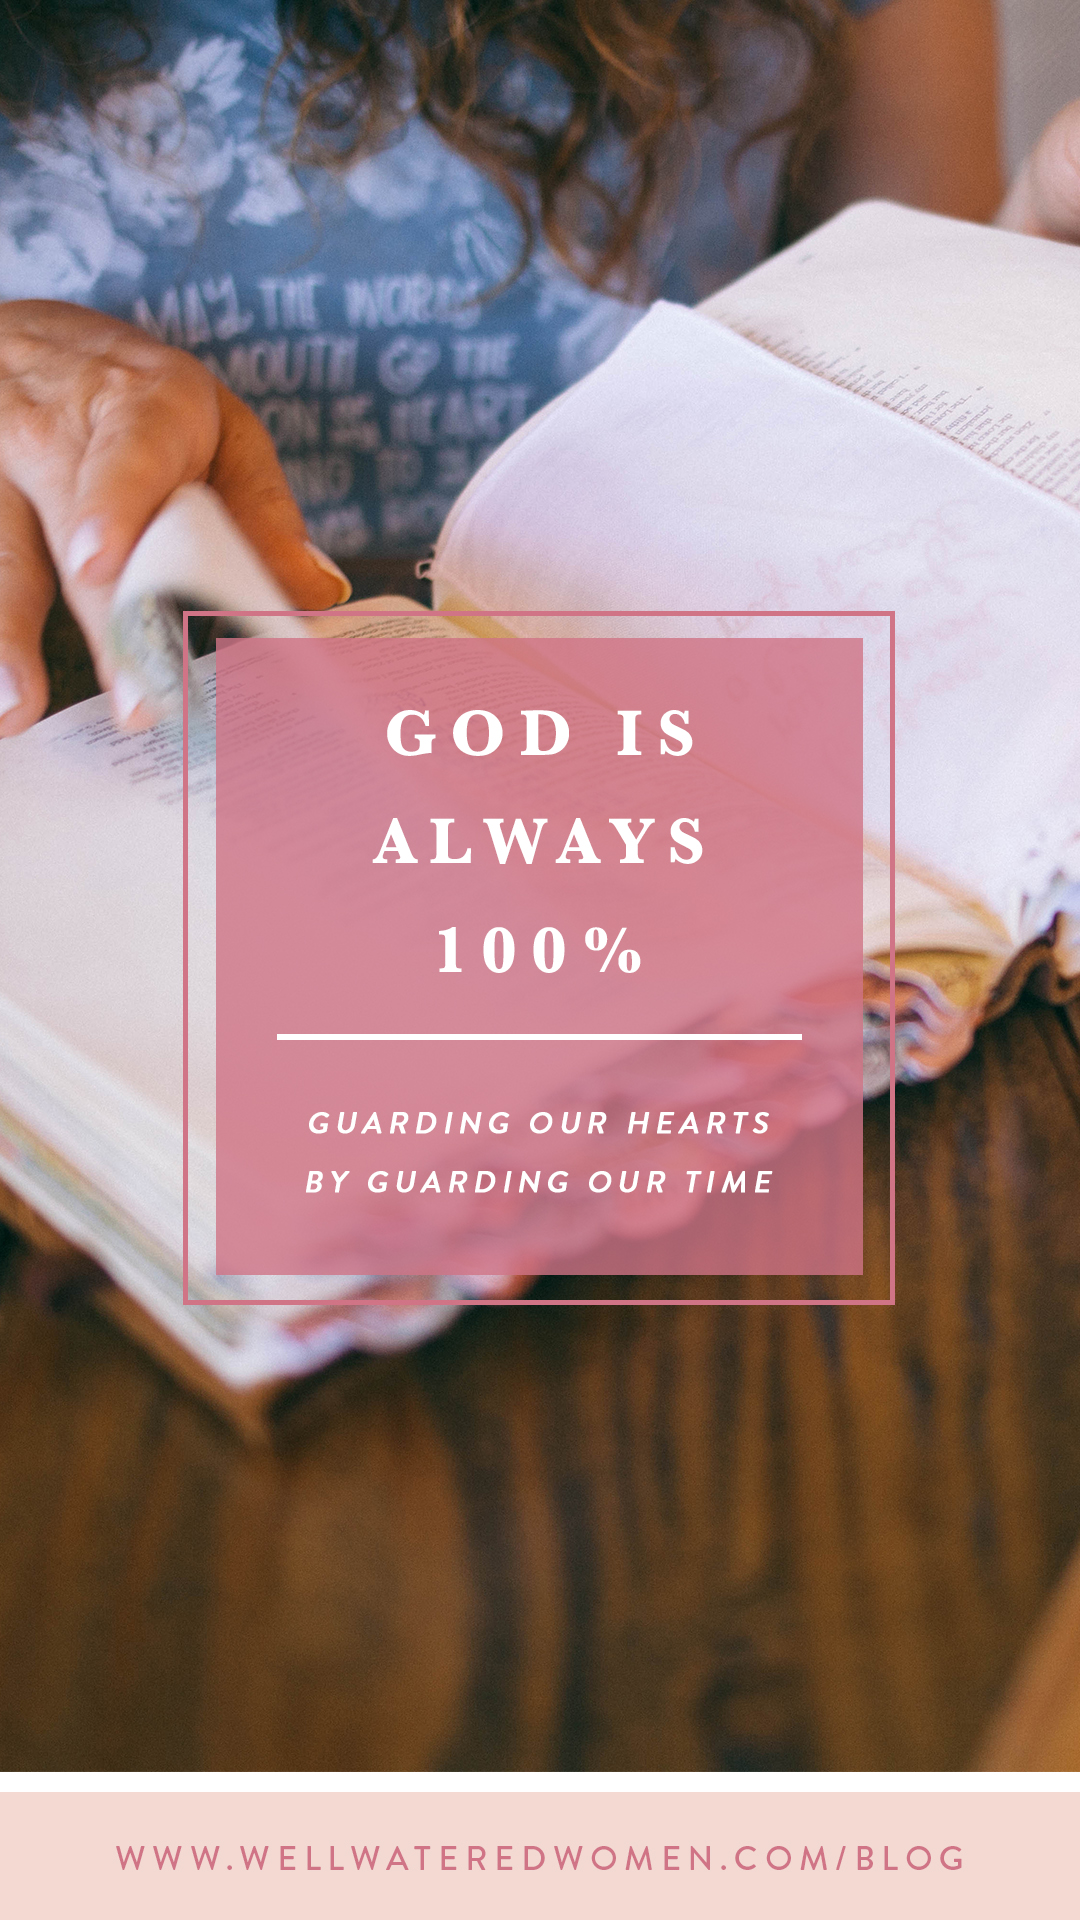 God is ALWAYS 100%: Guarding our hearts by guarding our time